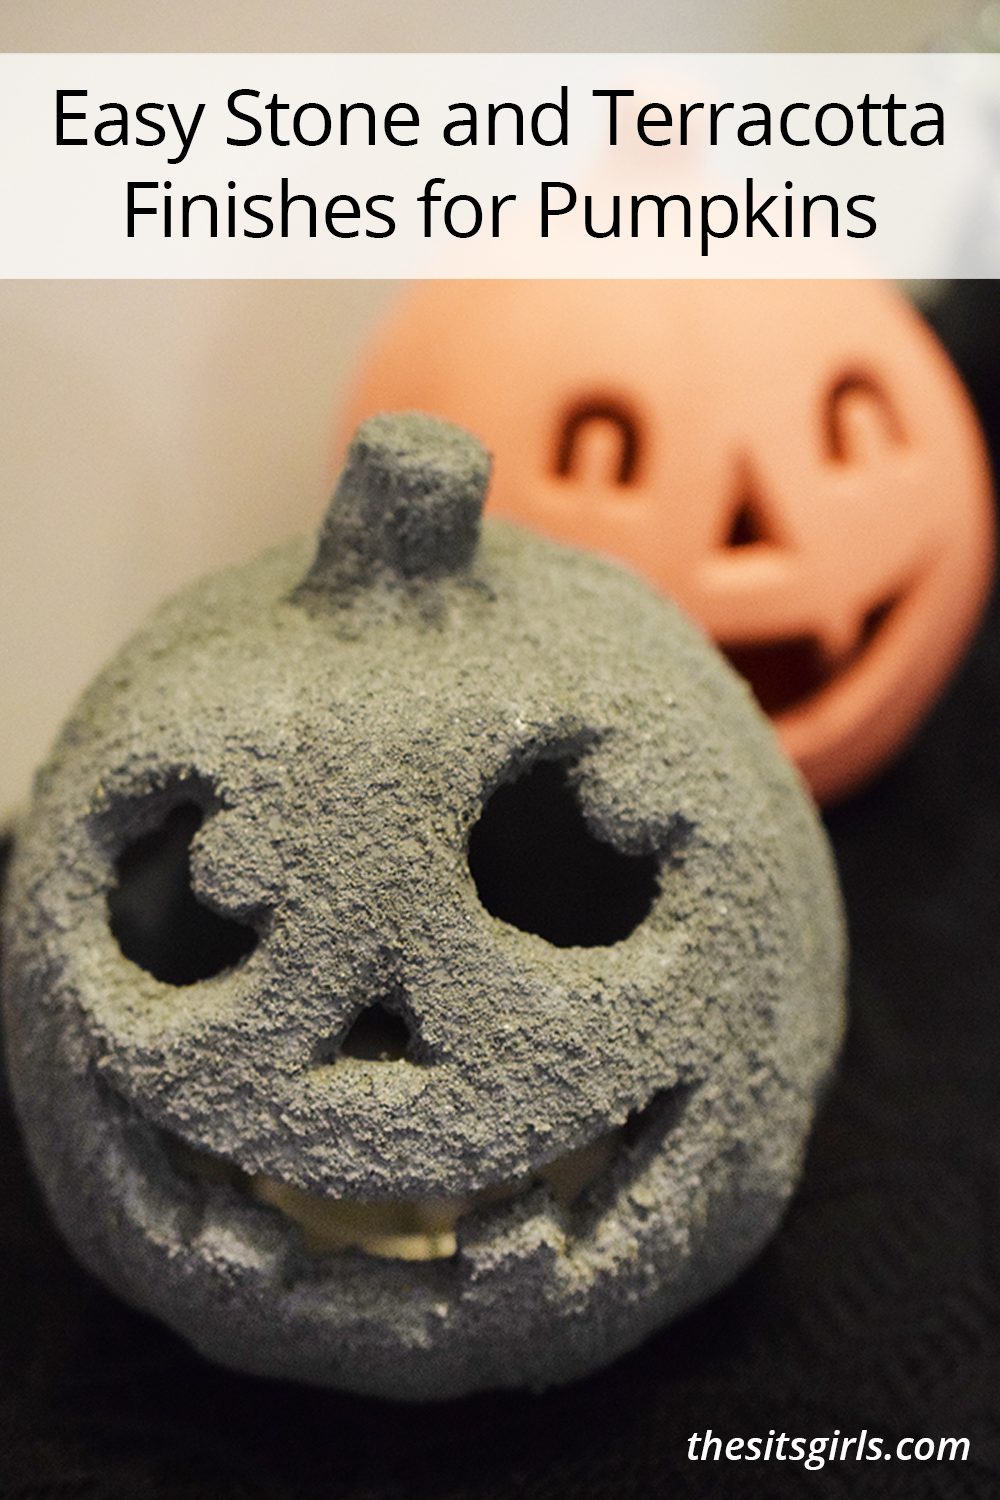 Easy stone and terracotta finishes for pumpkins.